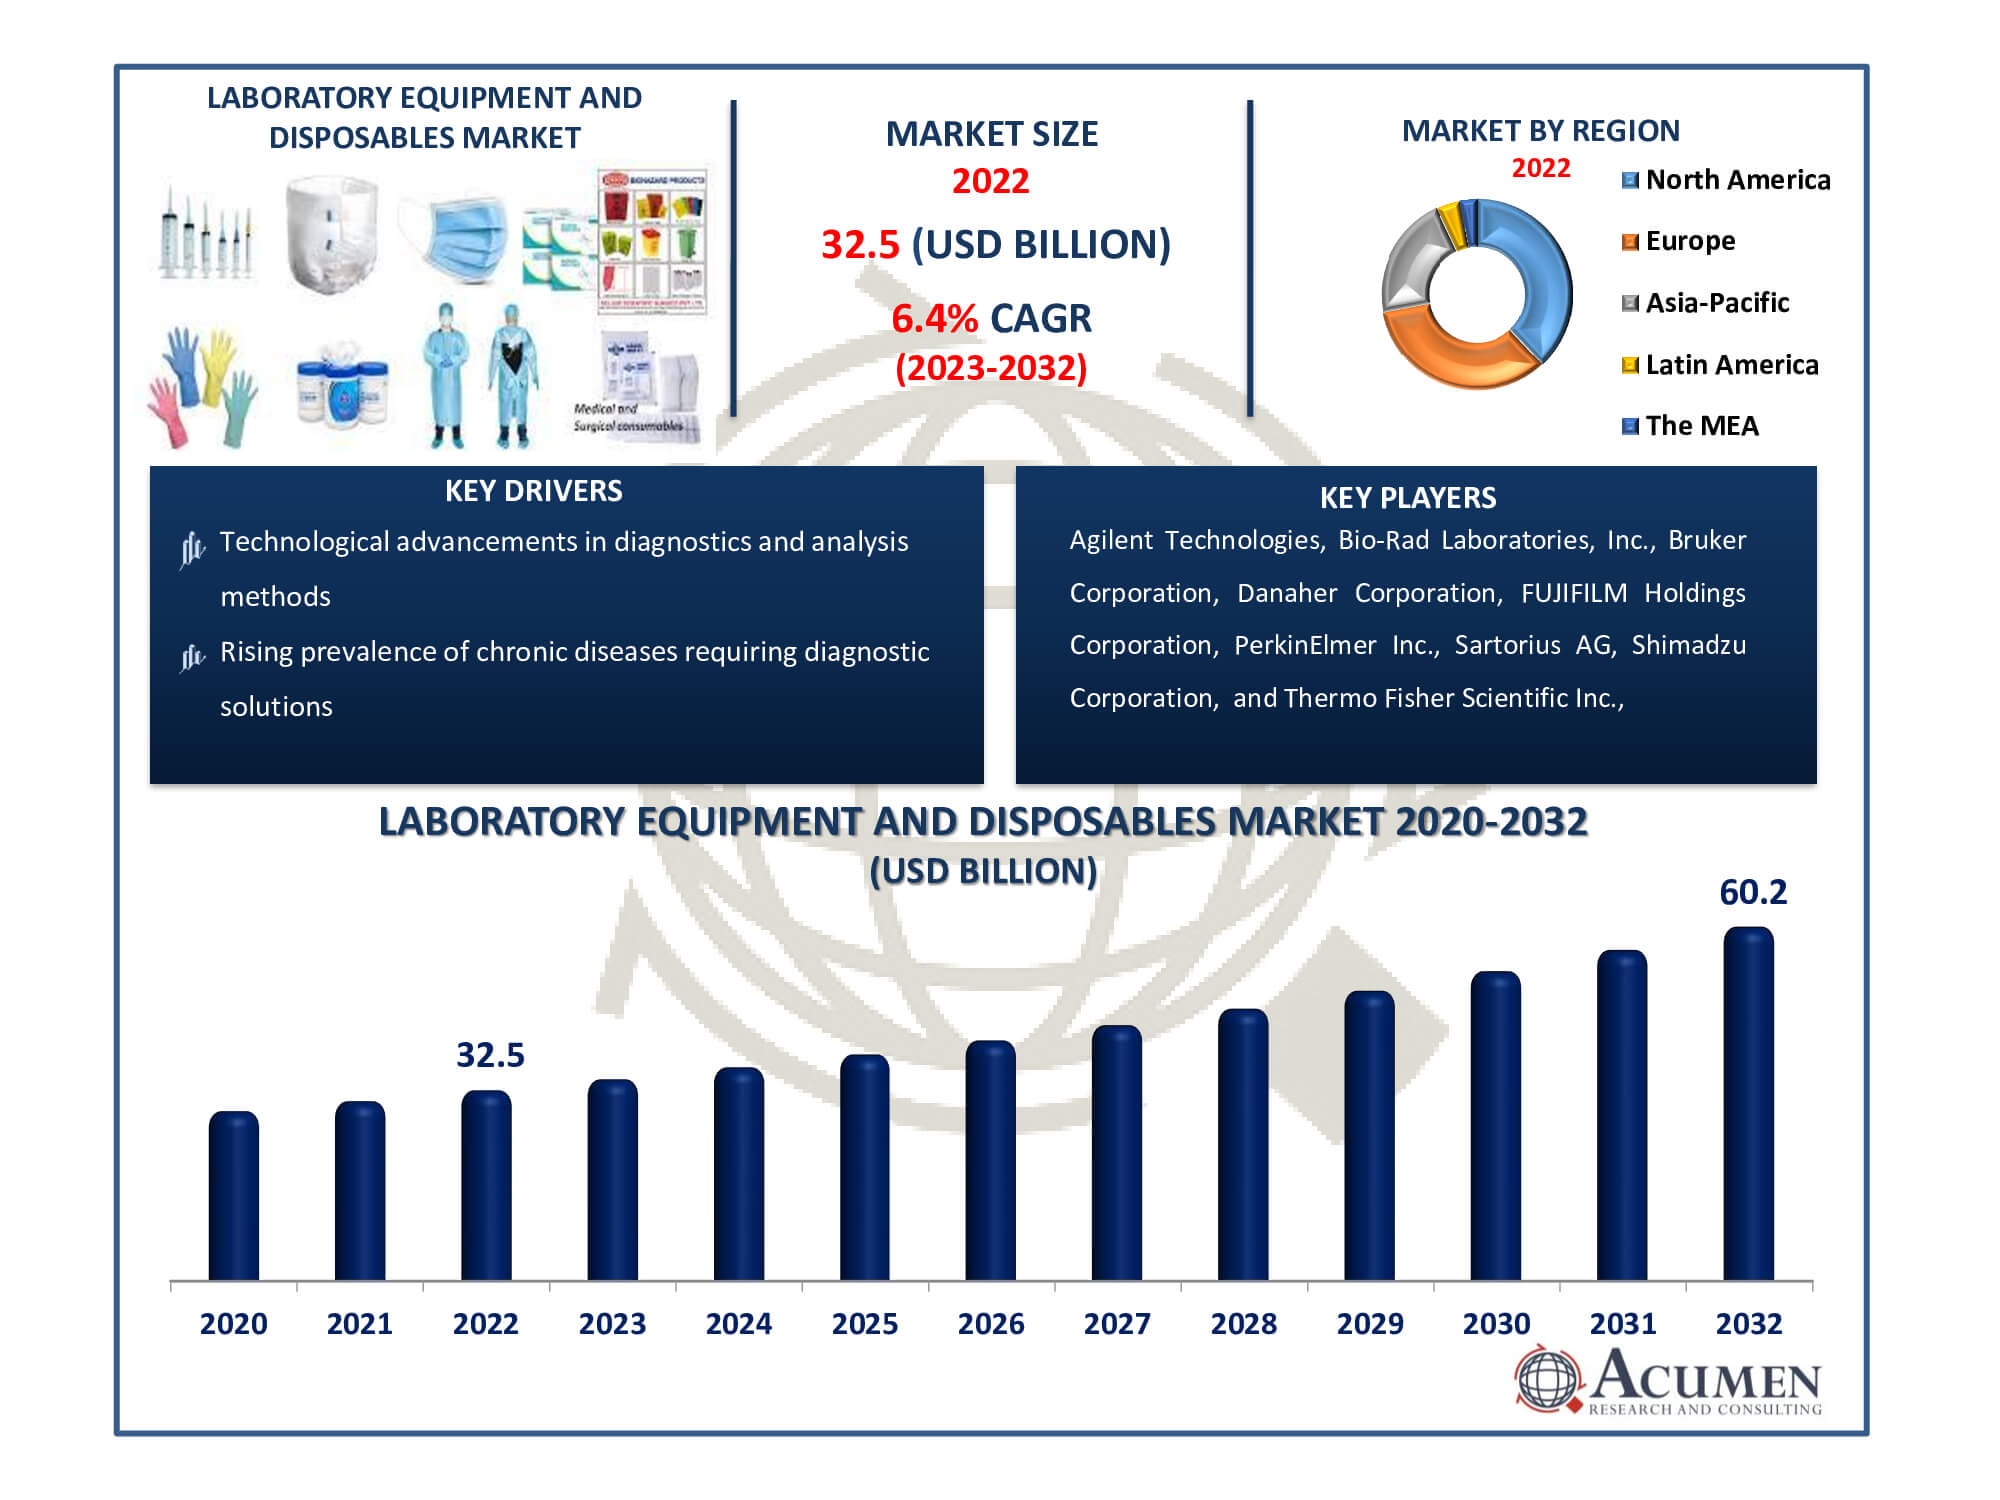 Laboratory Equipment and Disposables Market Dynamics